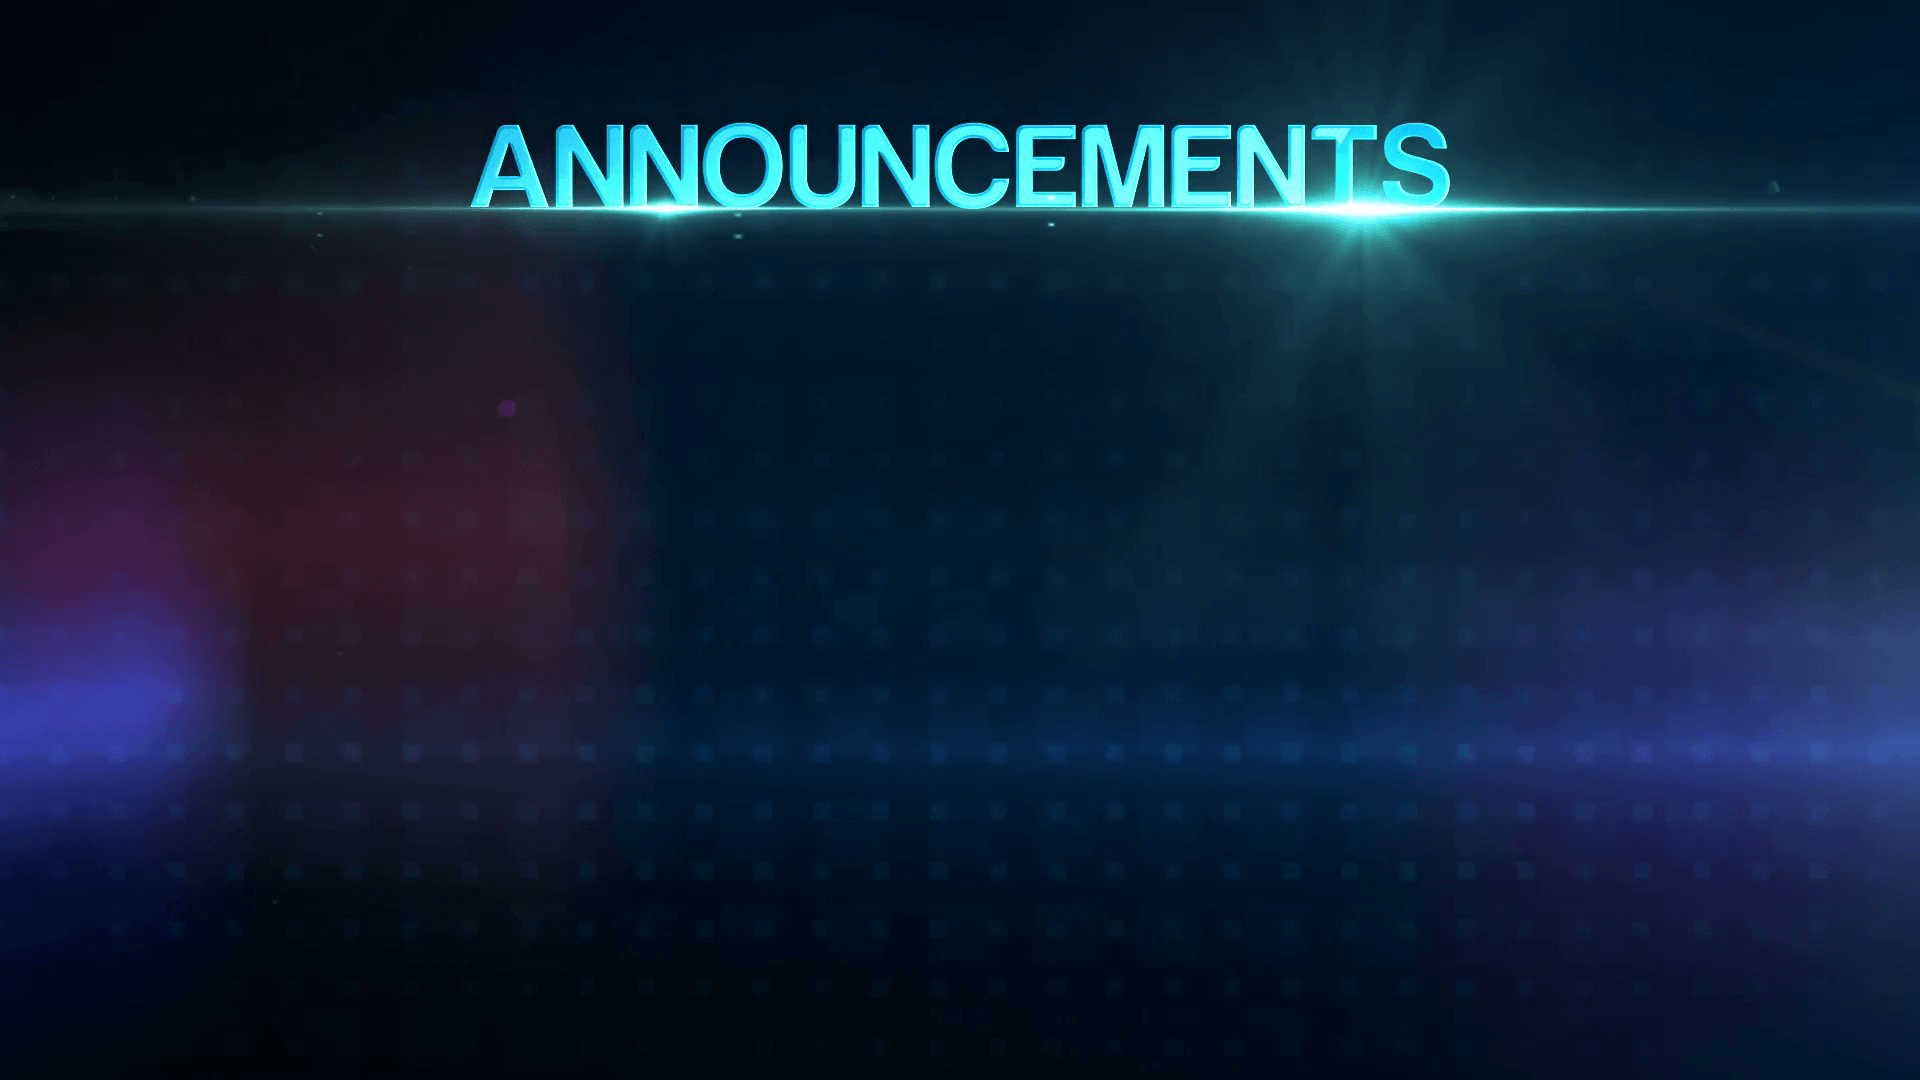 Worship Announcements Motion Background